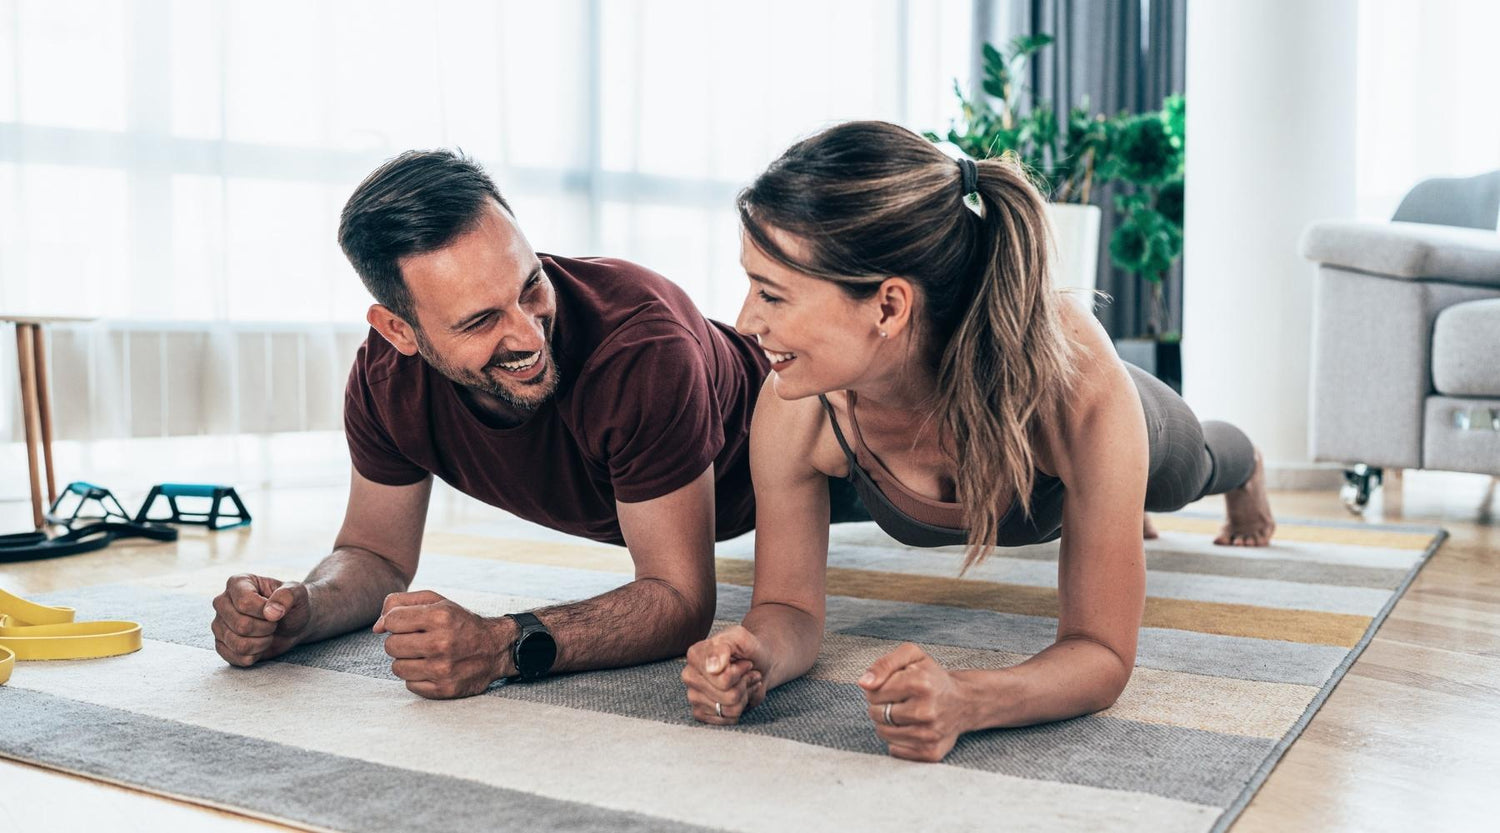 Young couple doing a plank exercise indoors while smiling